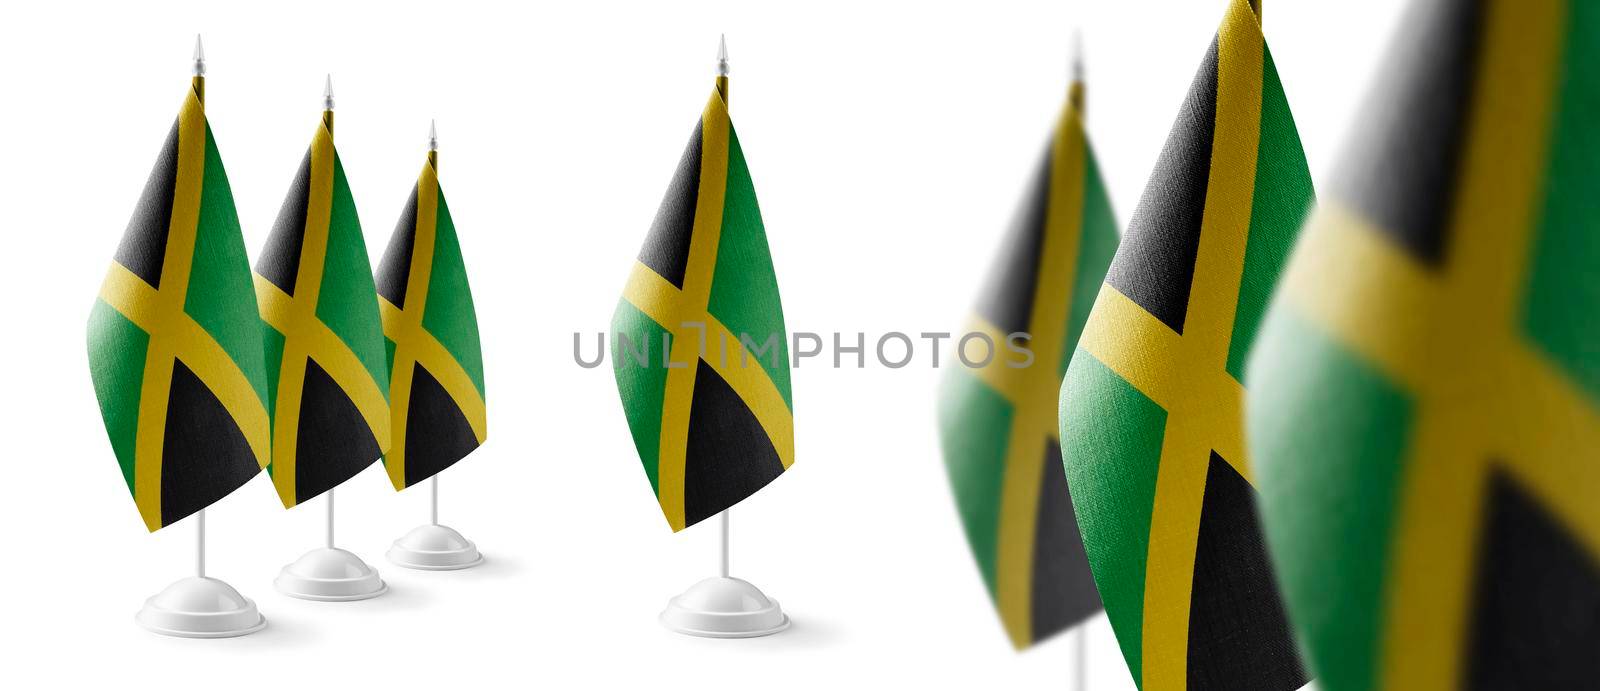 Set of Jamaica national flags on a white background.